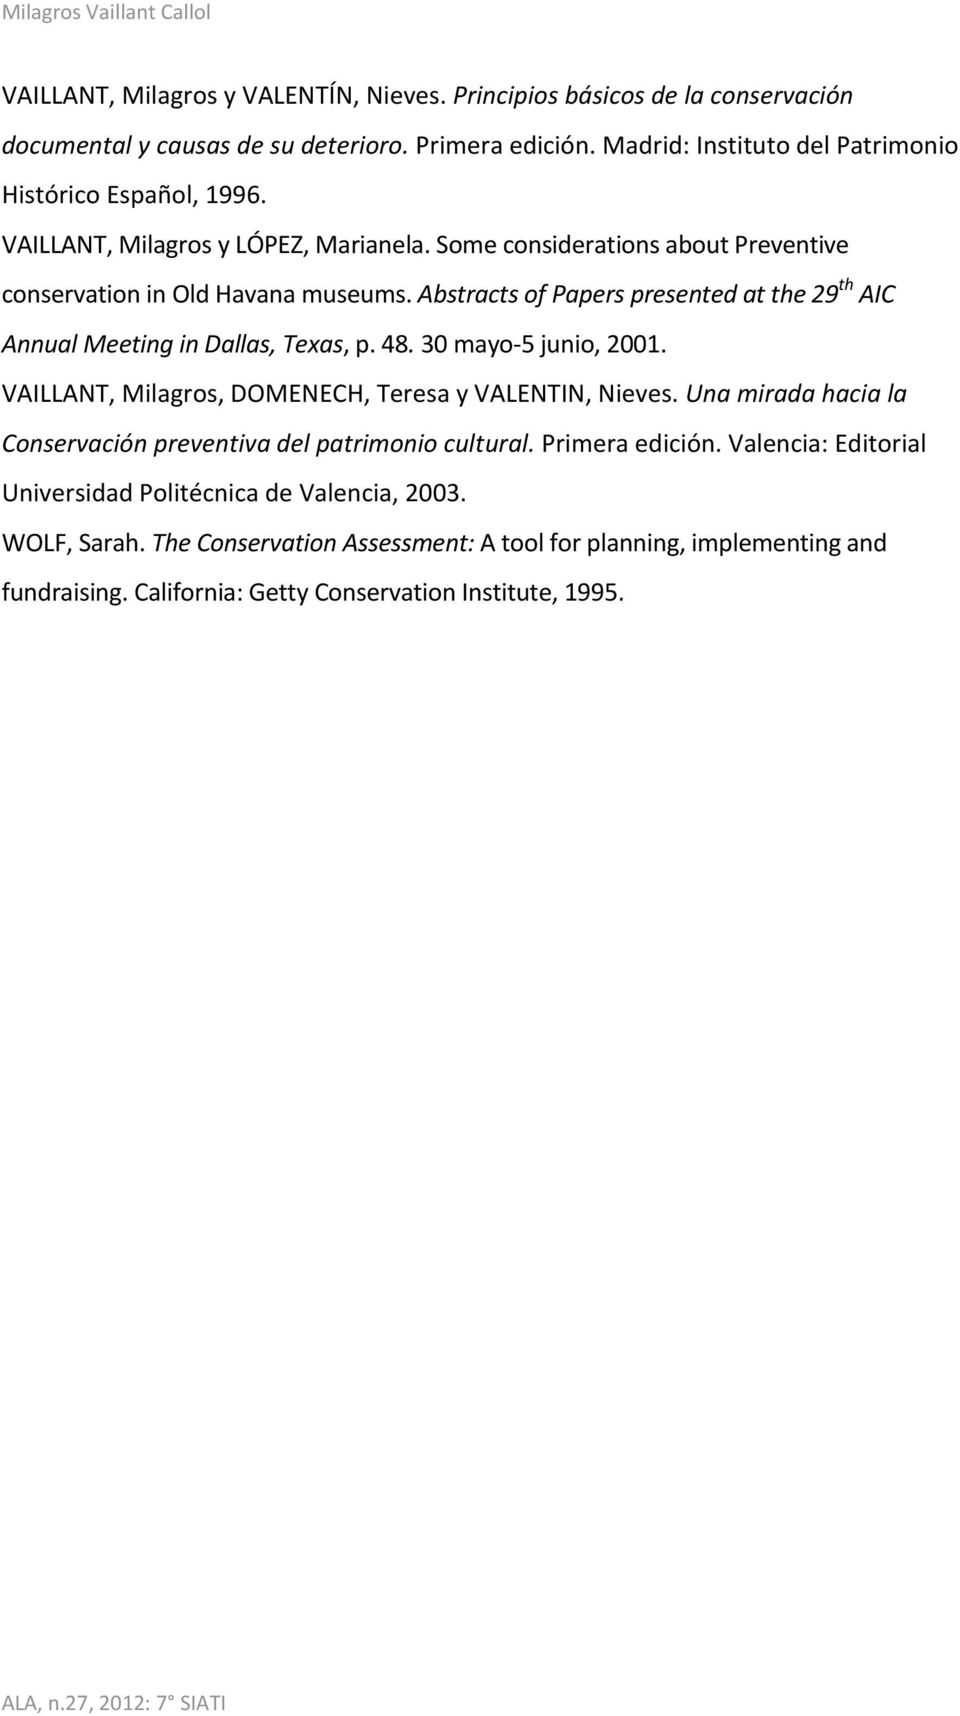 Abstracts of Papers presented at the 29 th AIC Annual Meeting in Dallas, Texas, p. 48. 30 mayo-5 junio, 2001. VAILLANT, Milagros, DOMENECH, Teresa y VALENTIN, Nieves.